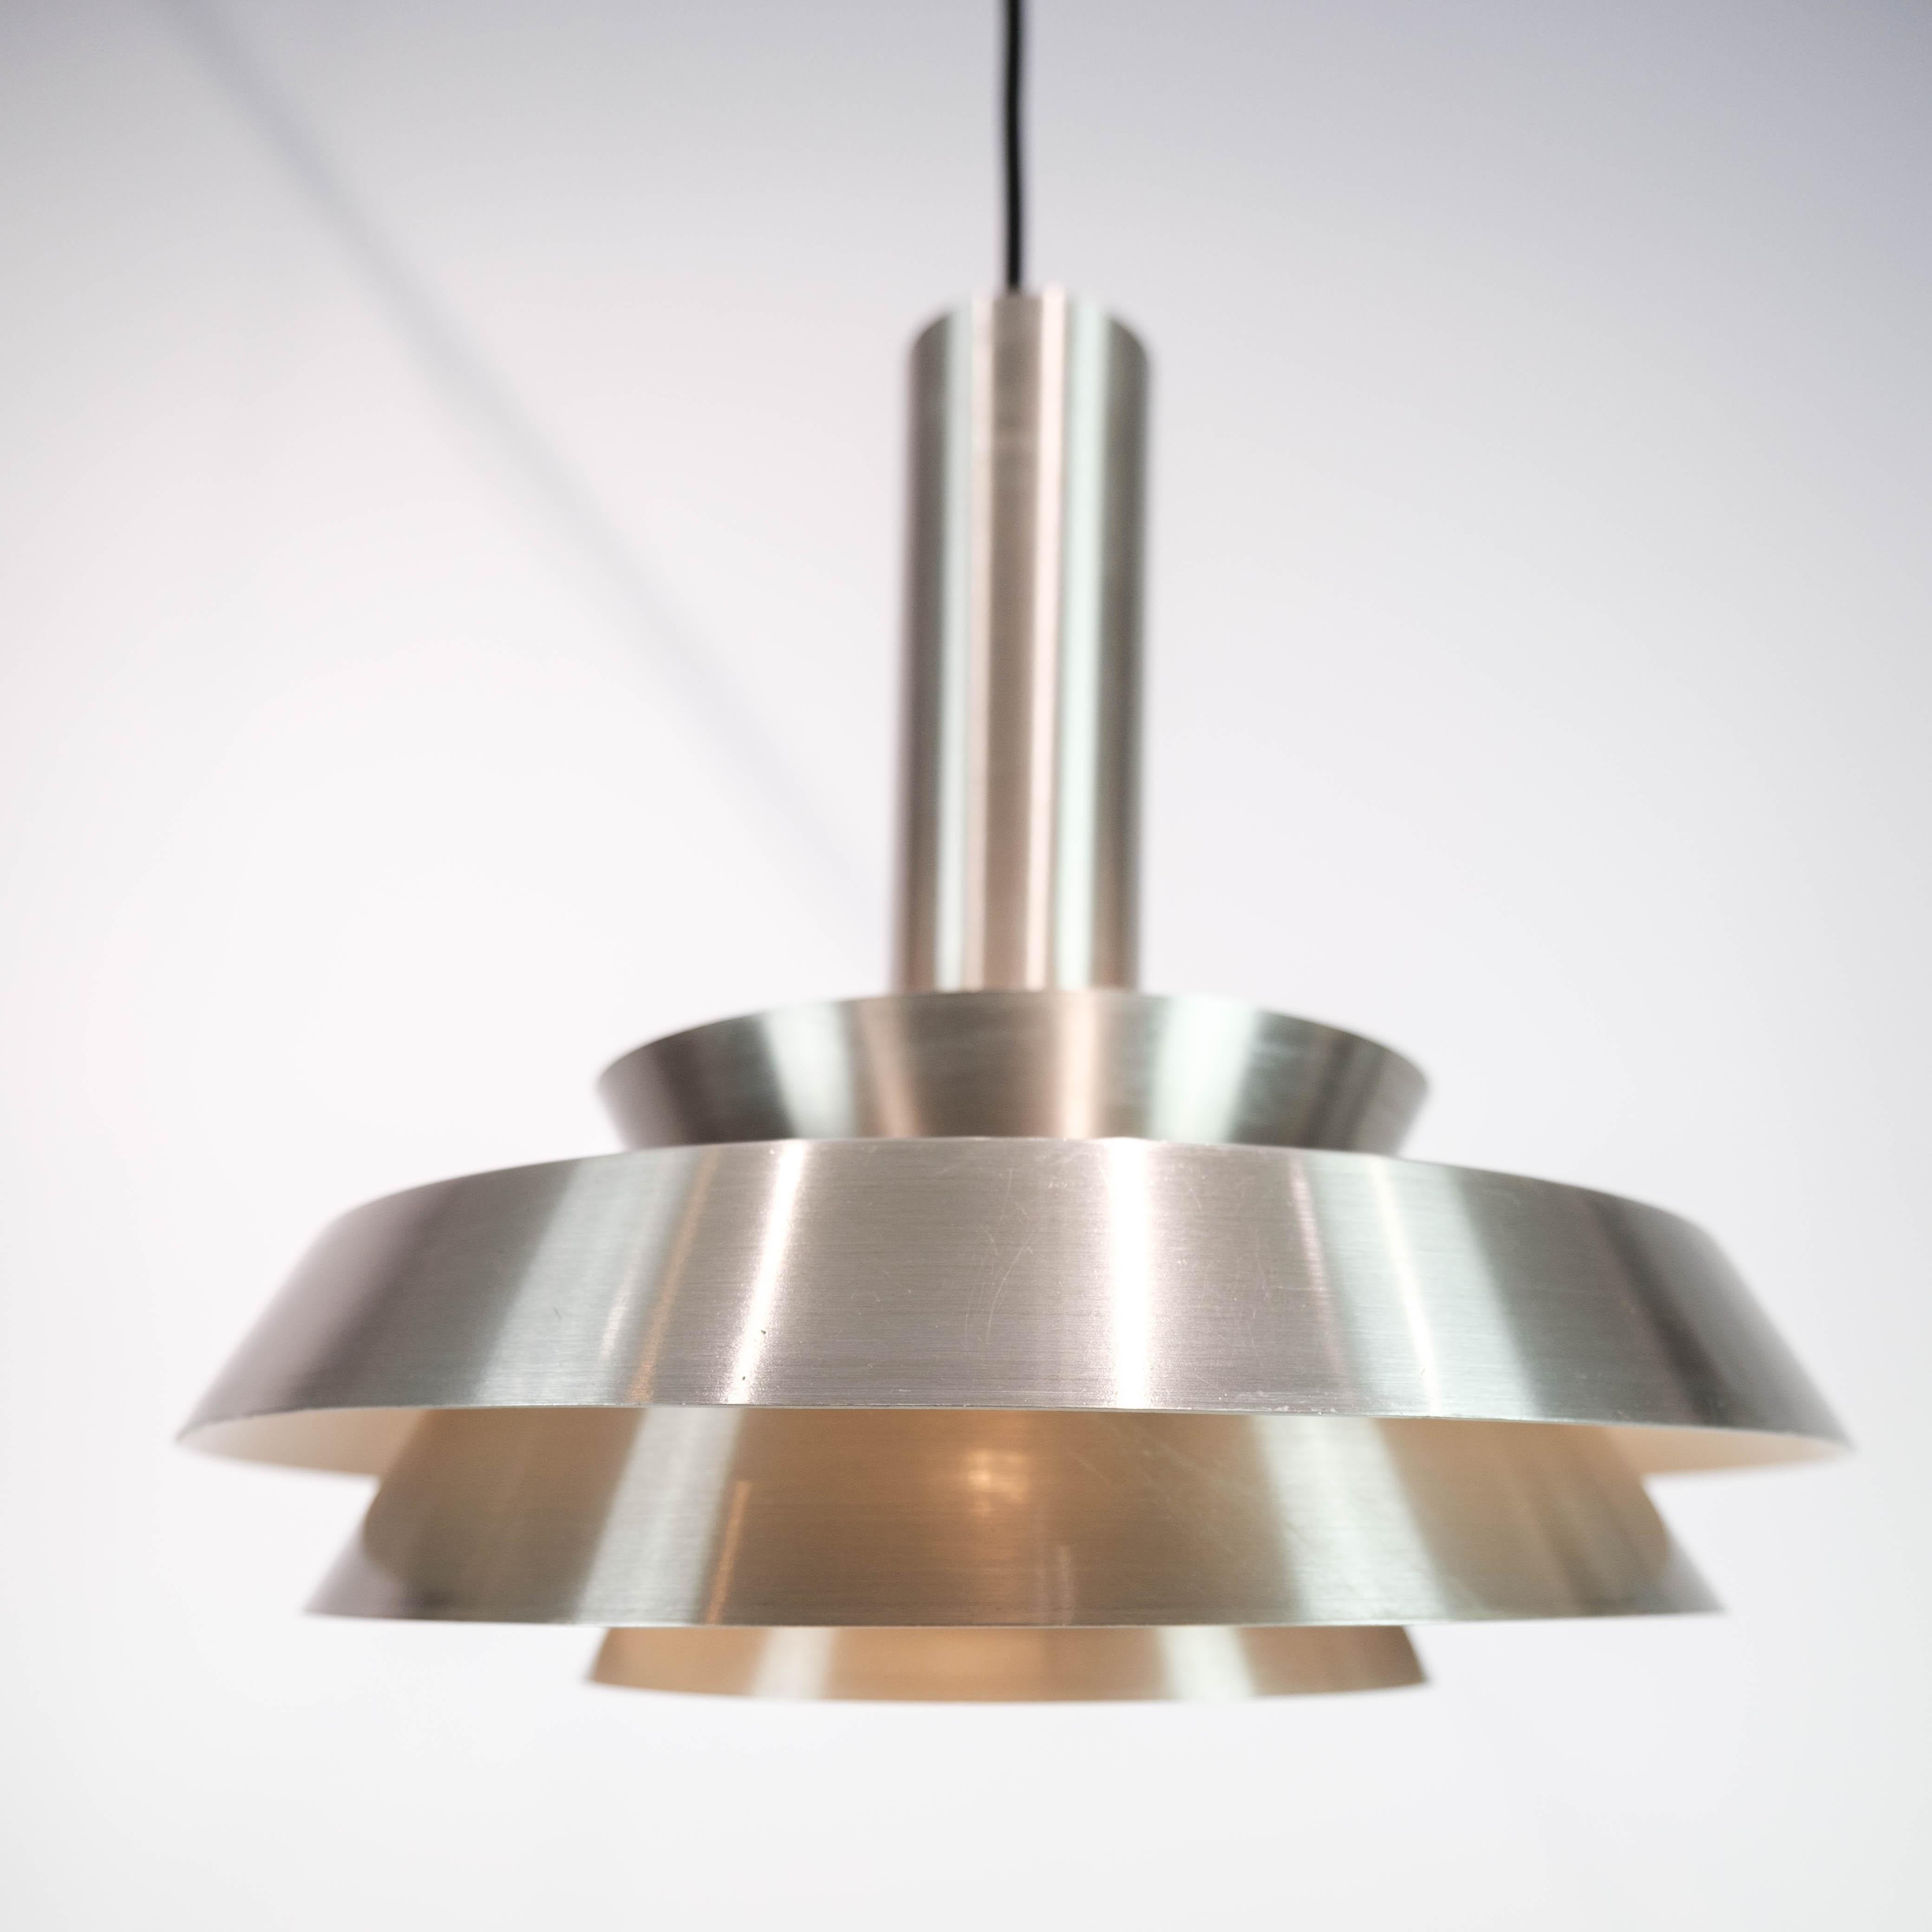 Ceiling pendant in steel of Danish design from the 1960s. The lamp is in great vintage condition.